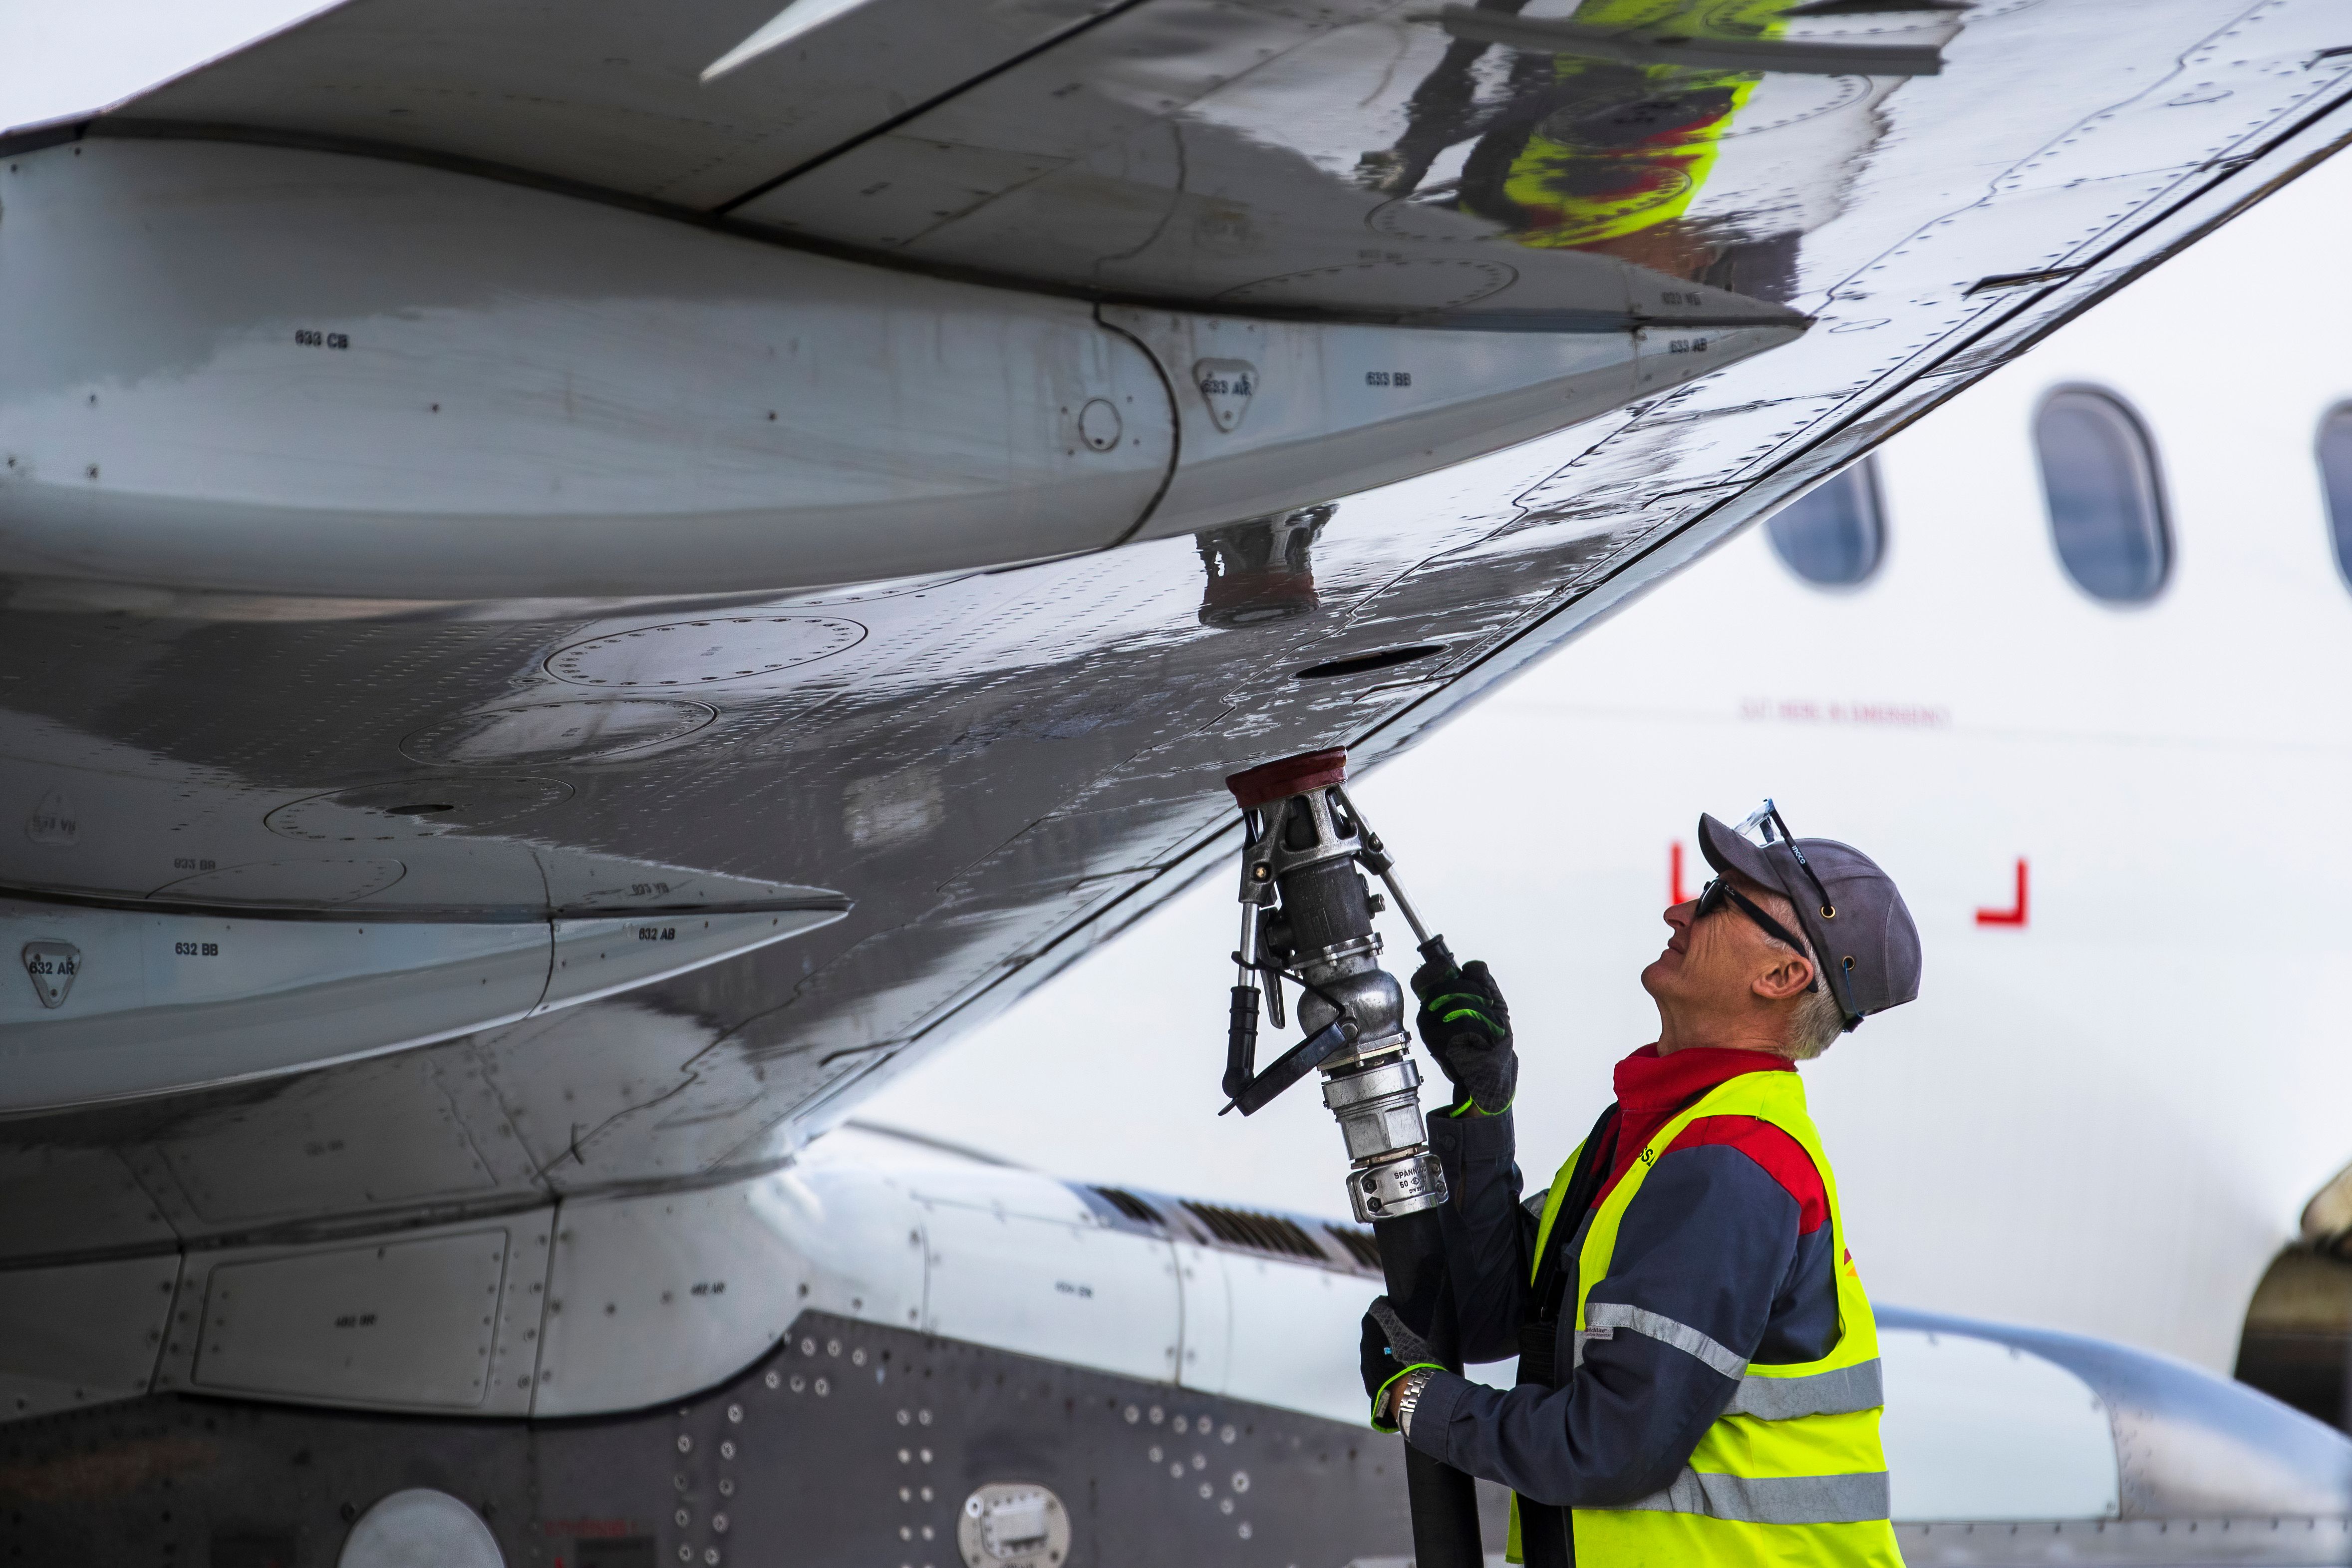 A worker fueling an aircraft at the airport.